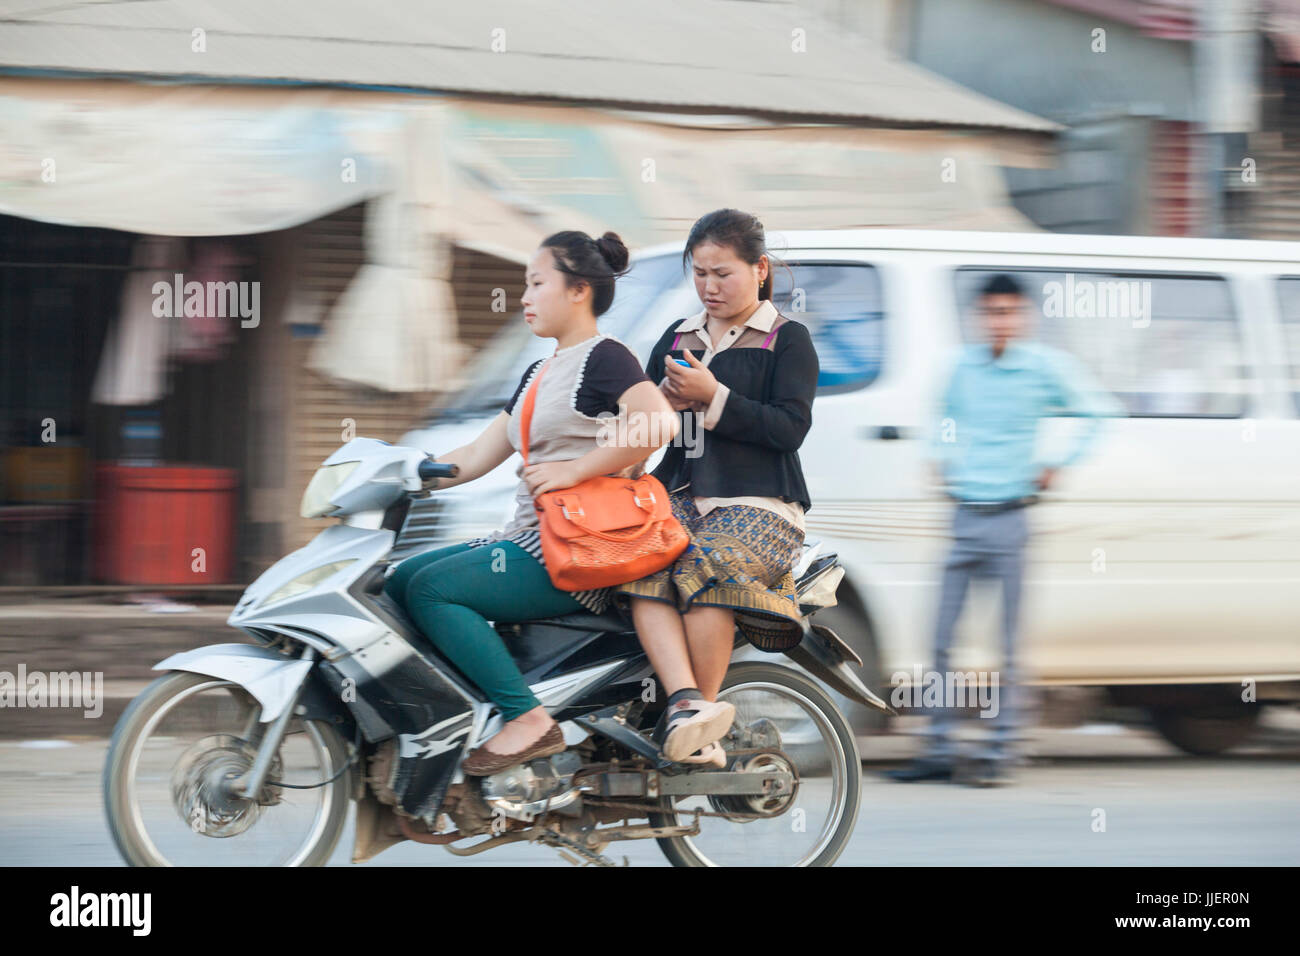 Young women ride a scooter together and check their phones on a busy street in Luang Prabang, Laos. Stock Photo